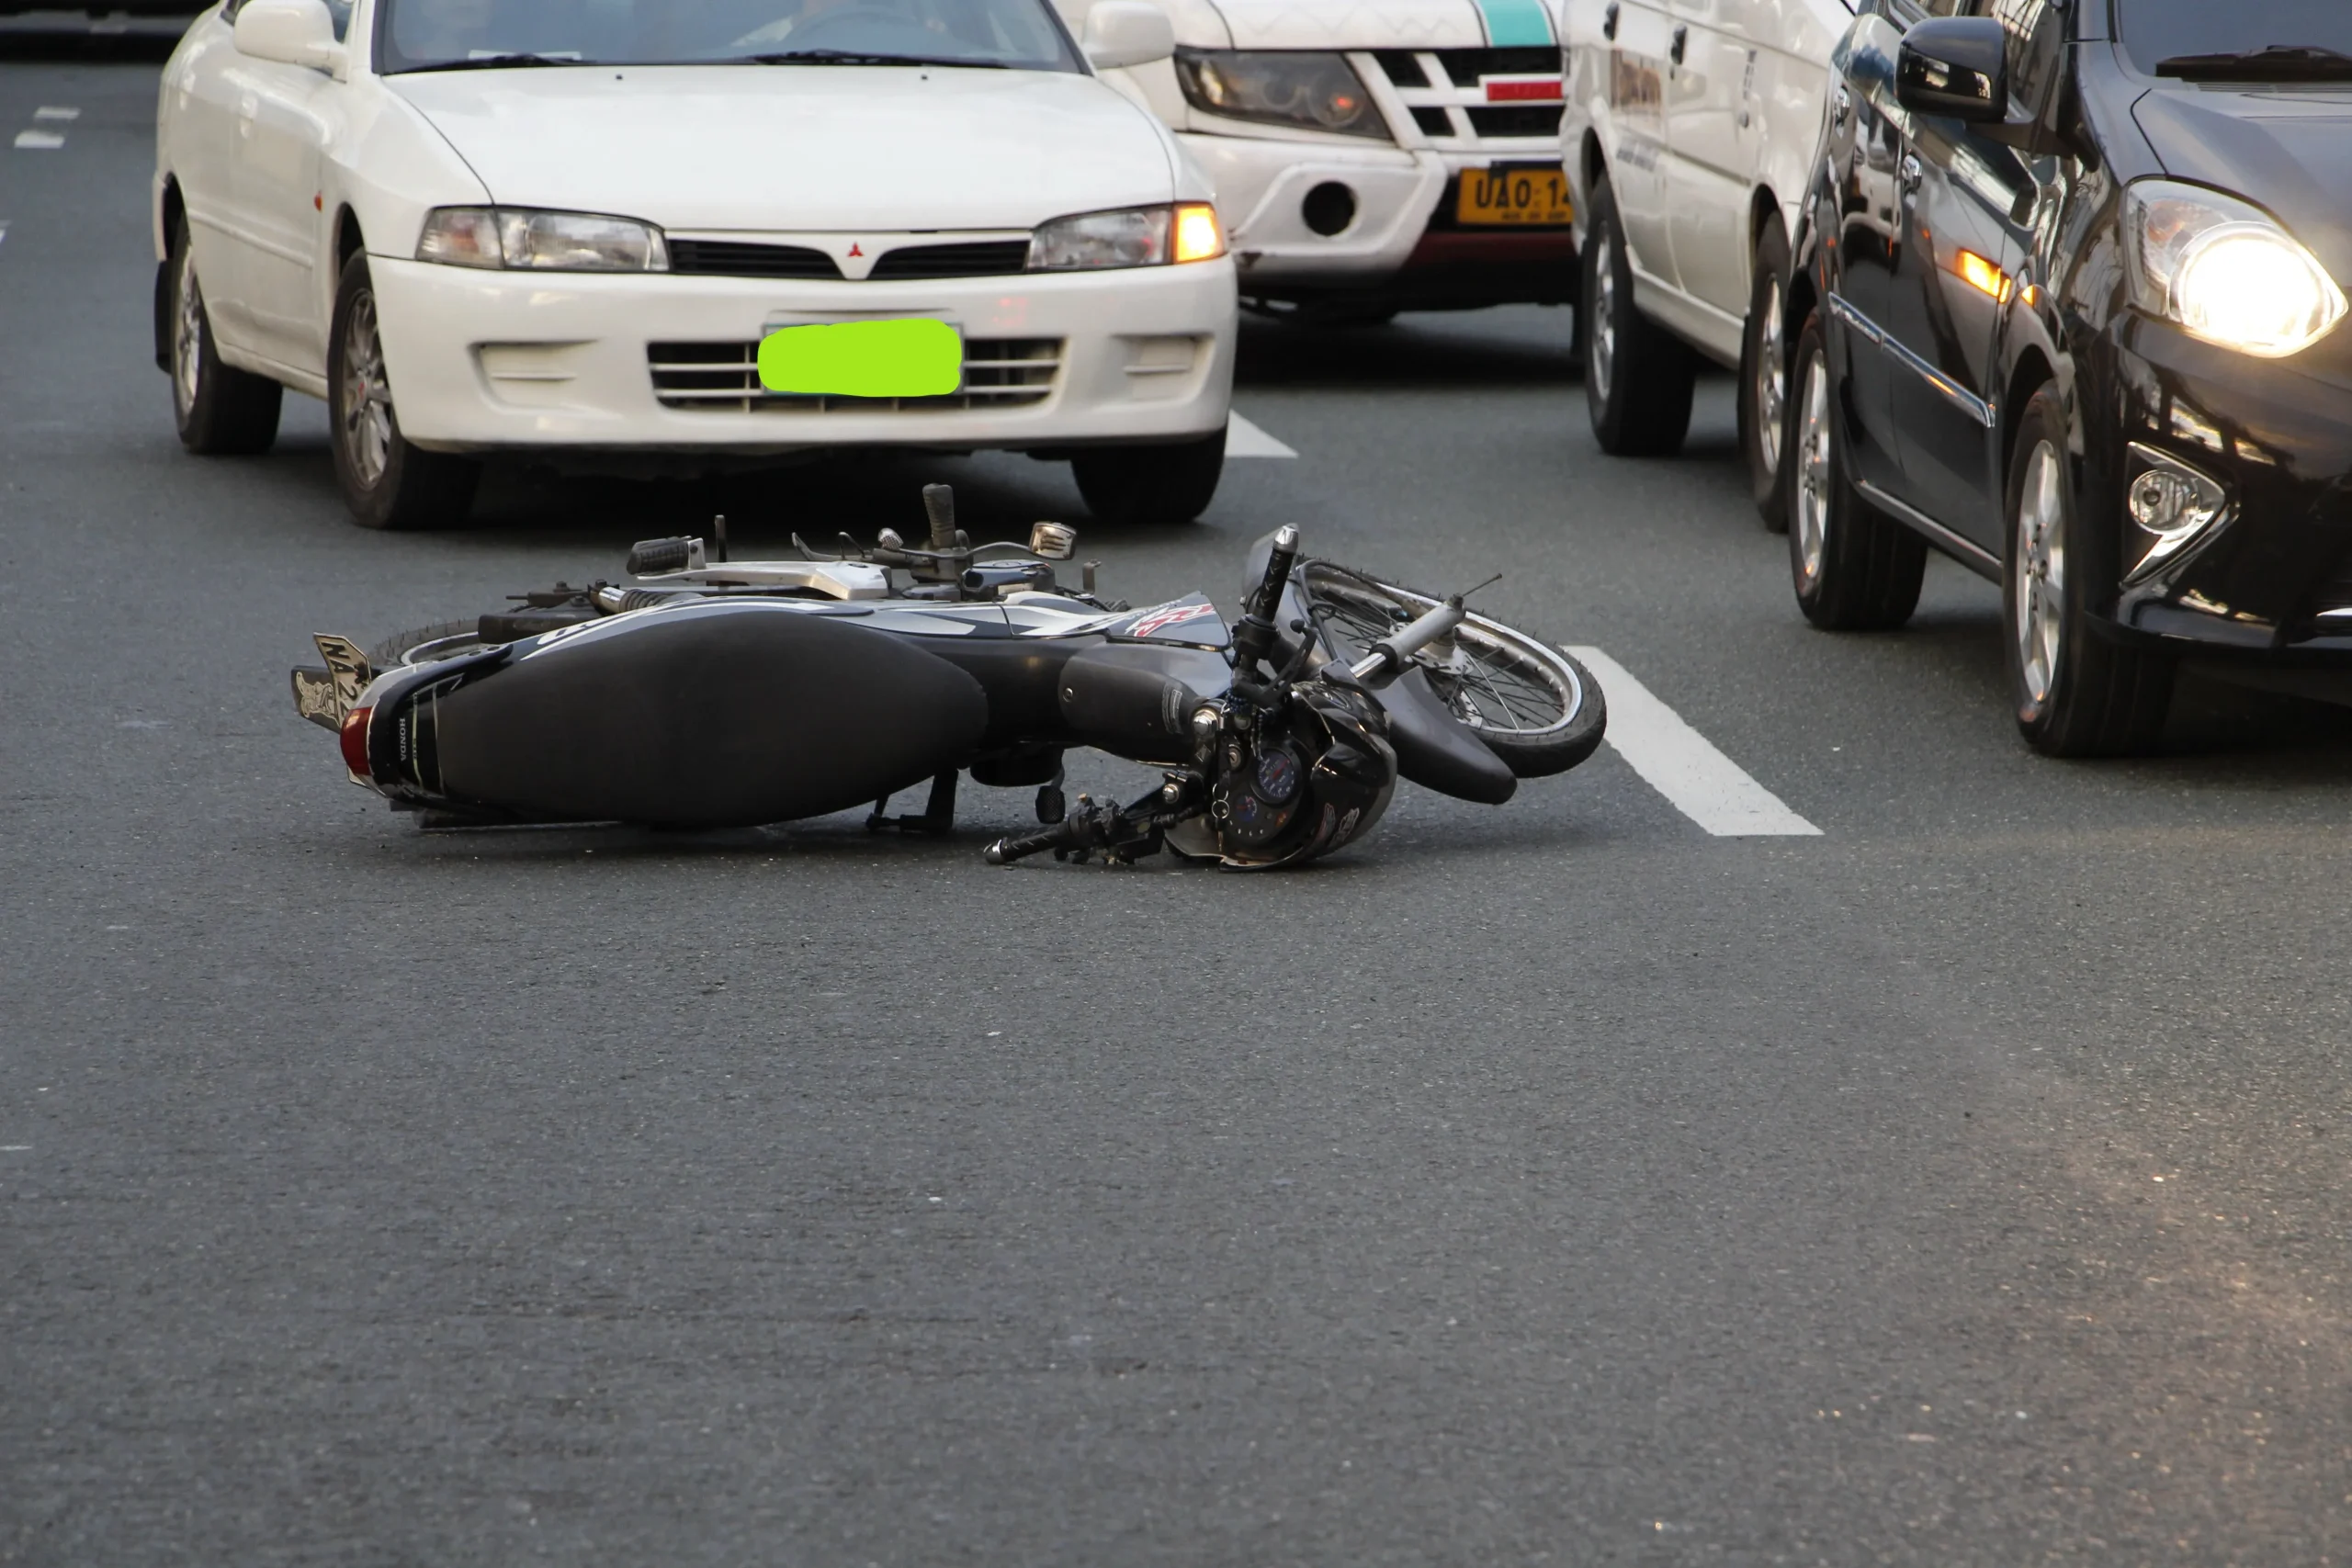 motorcycle after an accident.